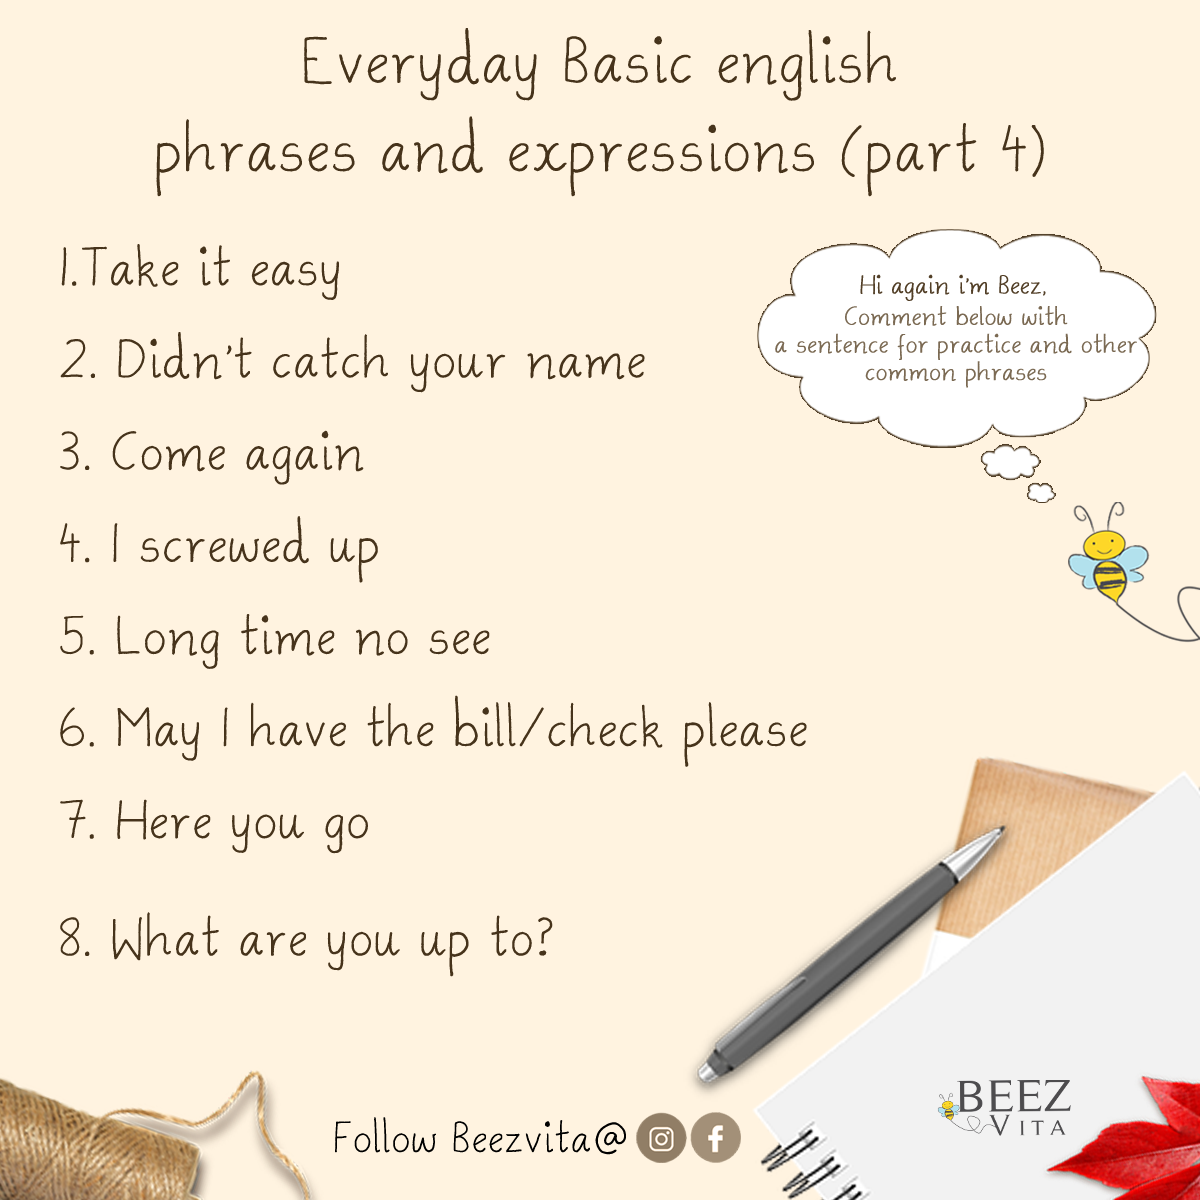 Beez Vita: Everyday Basic English phrases and expressions part 4